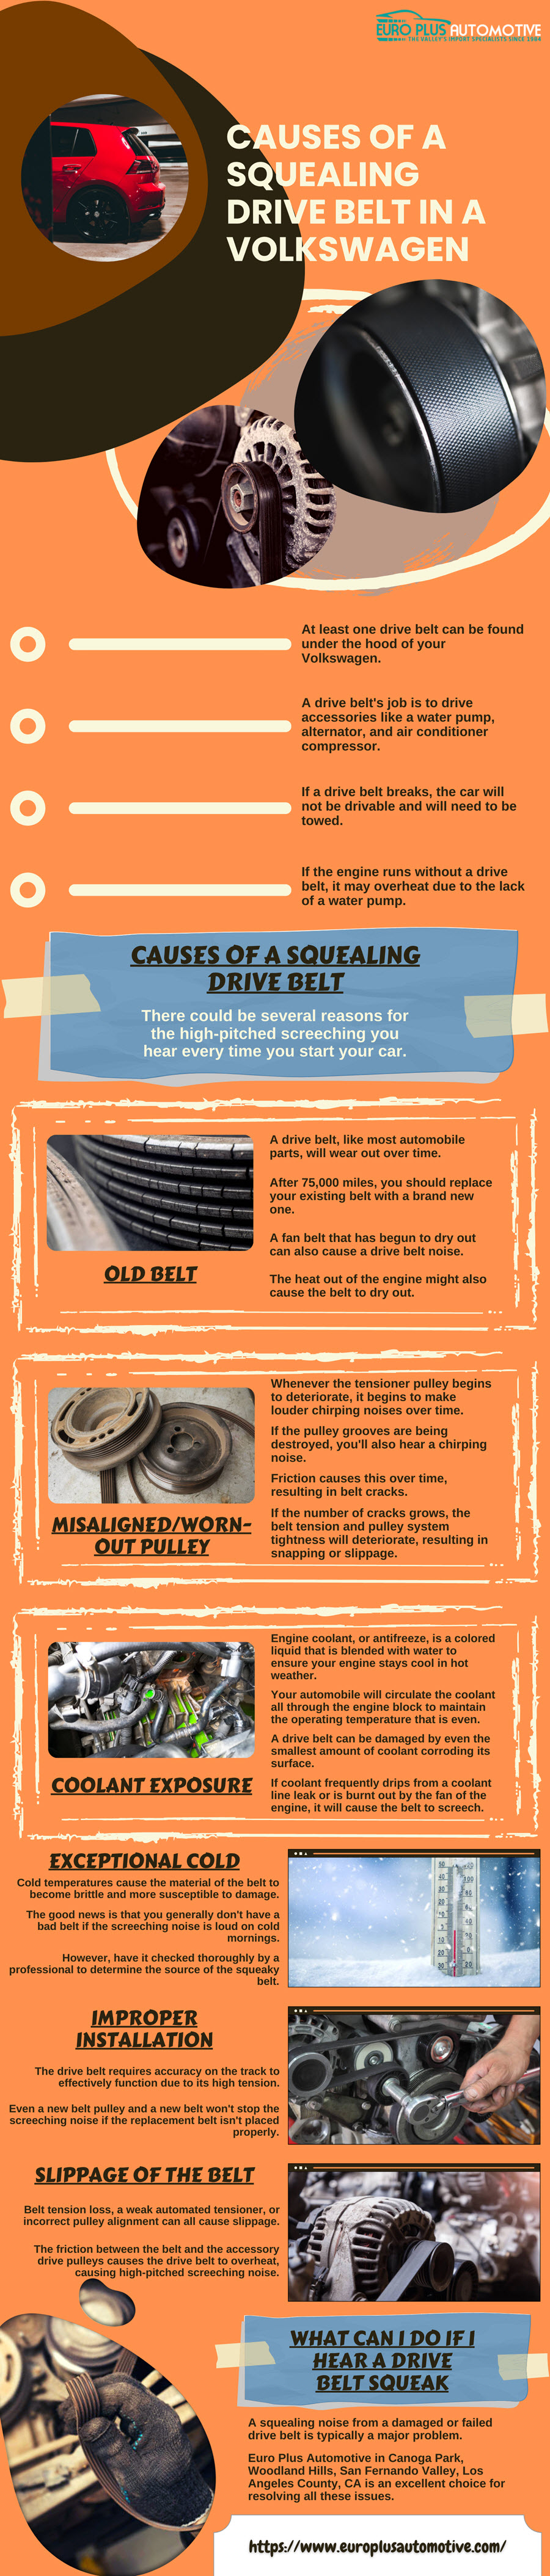 Causes of a Squealing Drive Belt in a Volkswagen